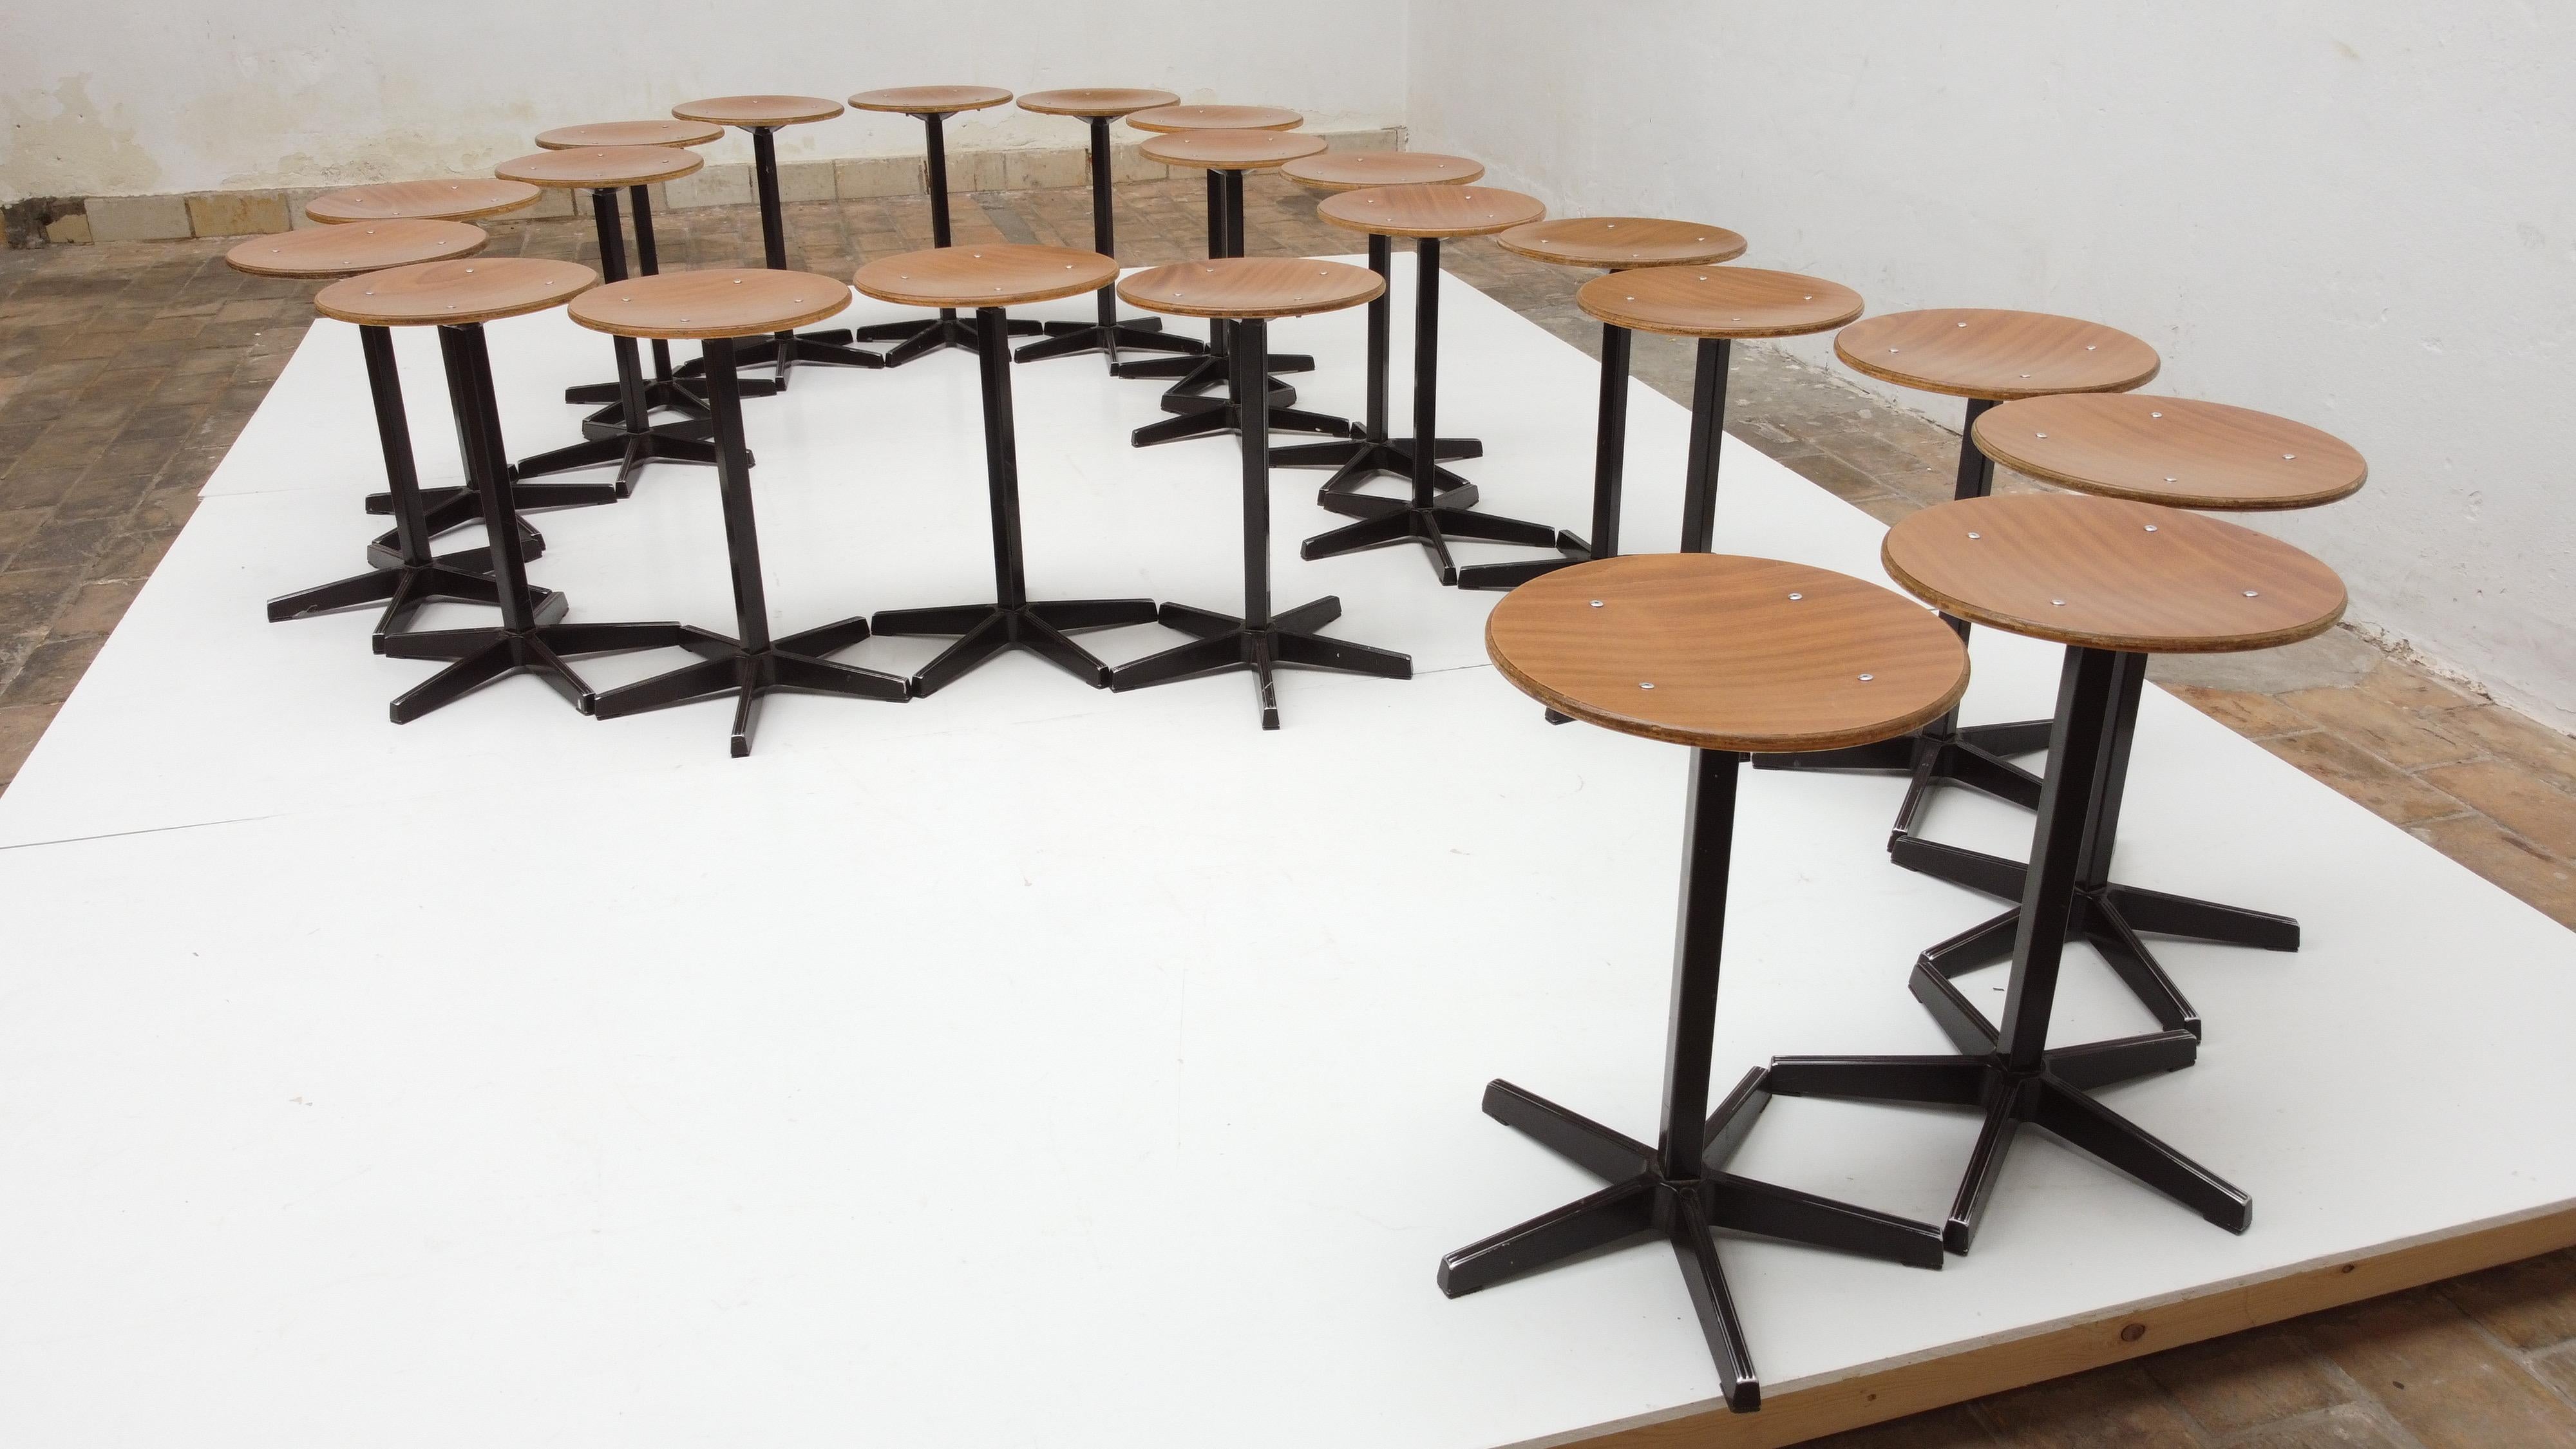 Late 20th Century Set of 21 Sturdy Industrial Stools by Dutch Manufacturer Galvanitas, 1970's